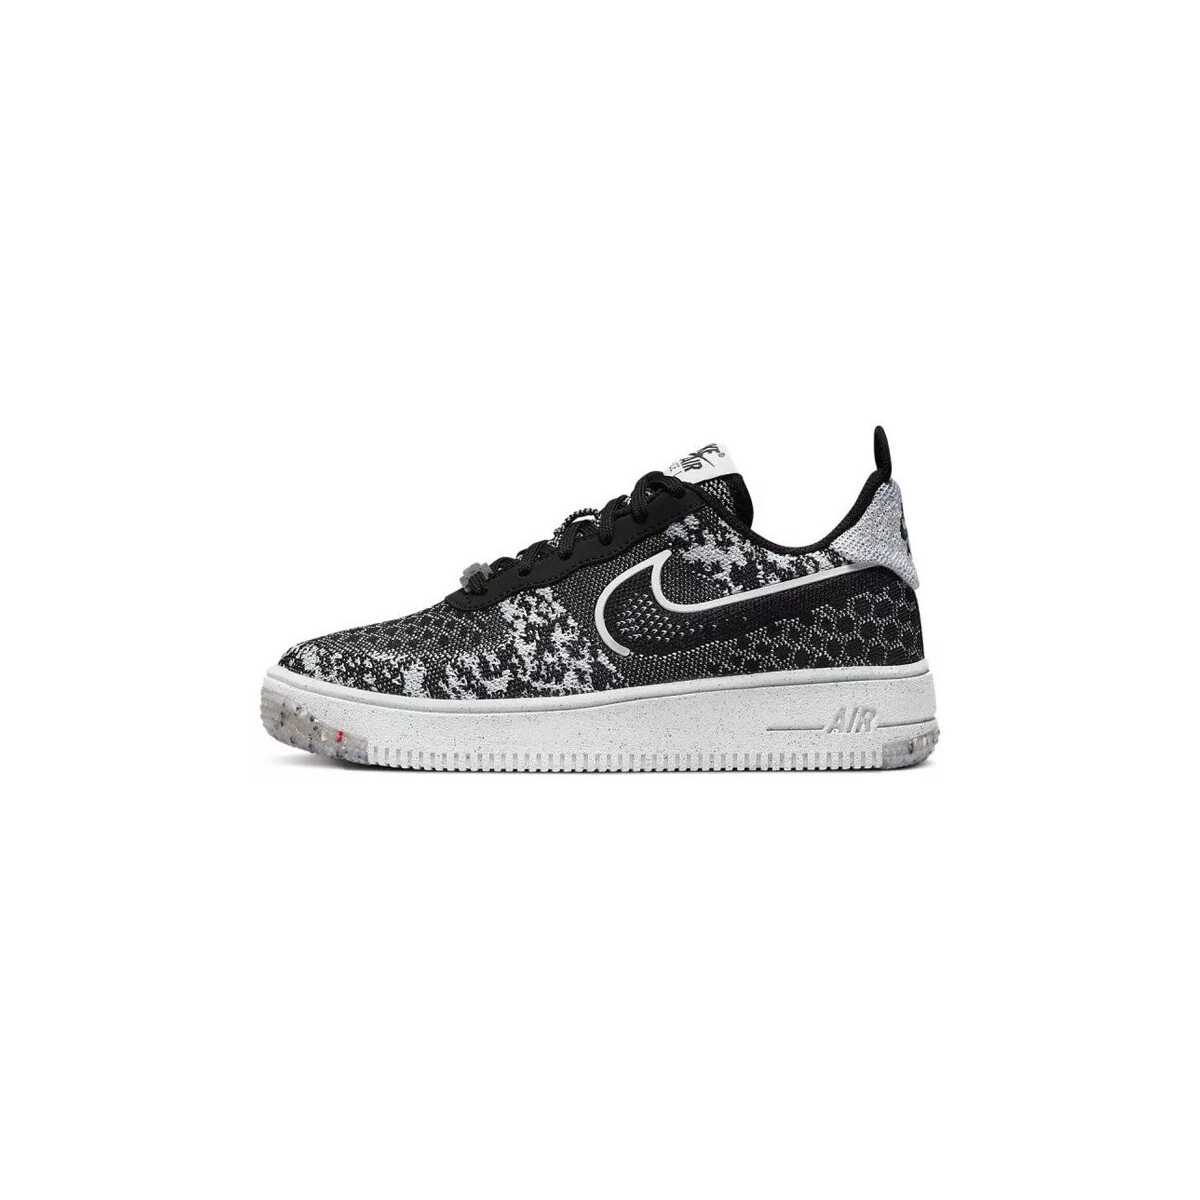 Nike Noir Air Force 1 Crater Flyknit Junior dSMg9nyD